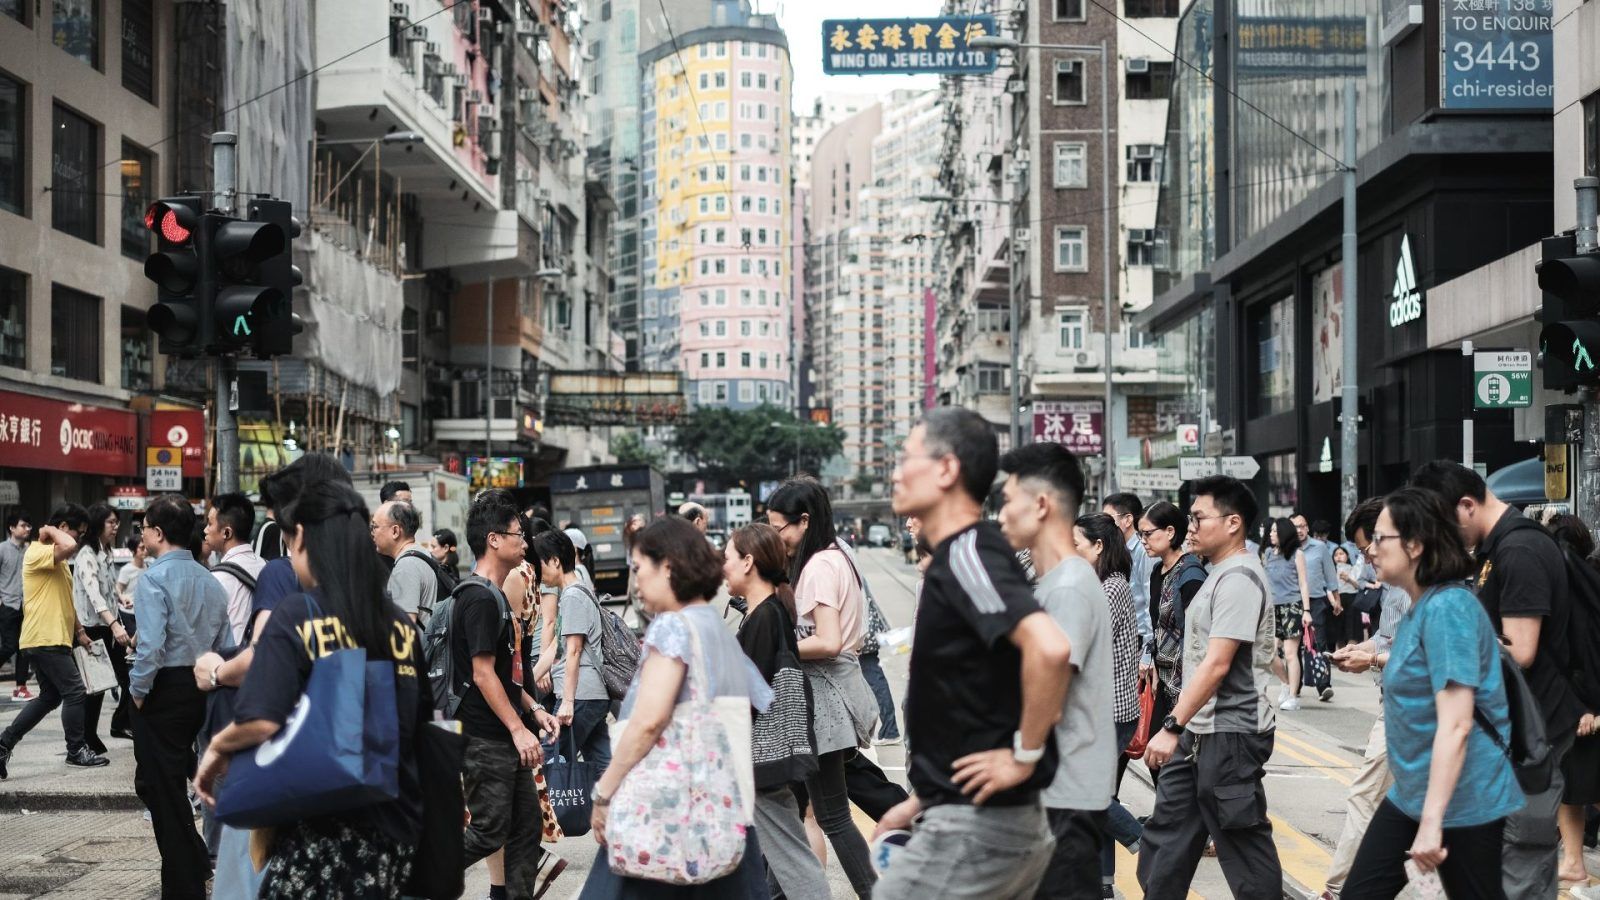 Hong Kong’s population will hit 8 million by 2046